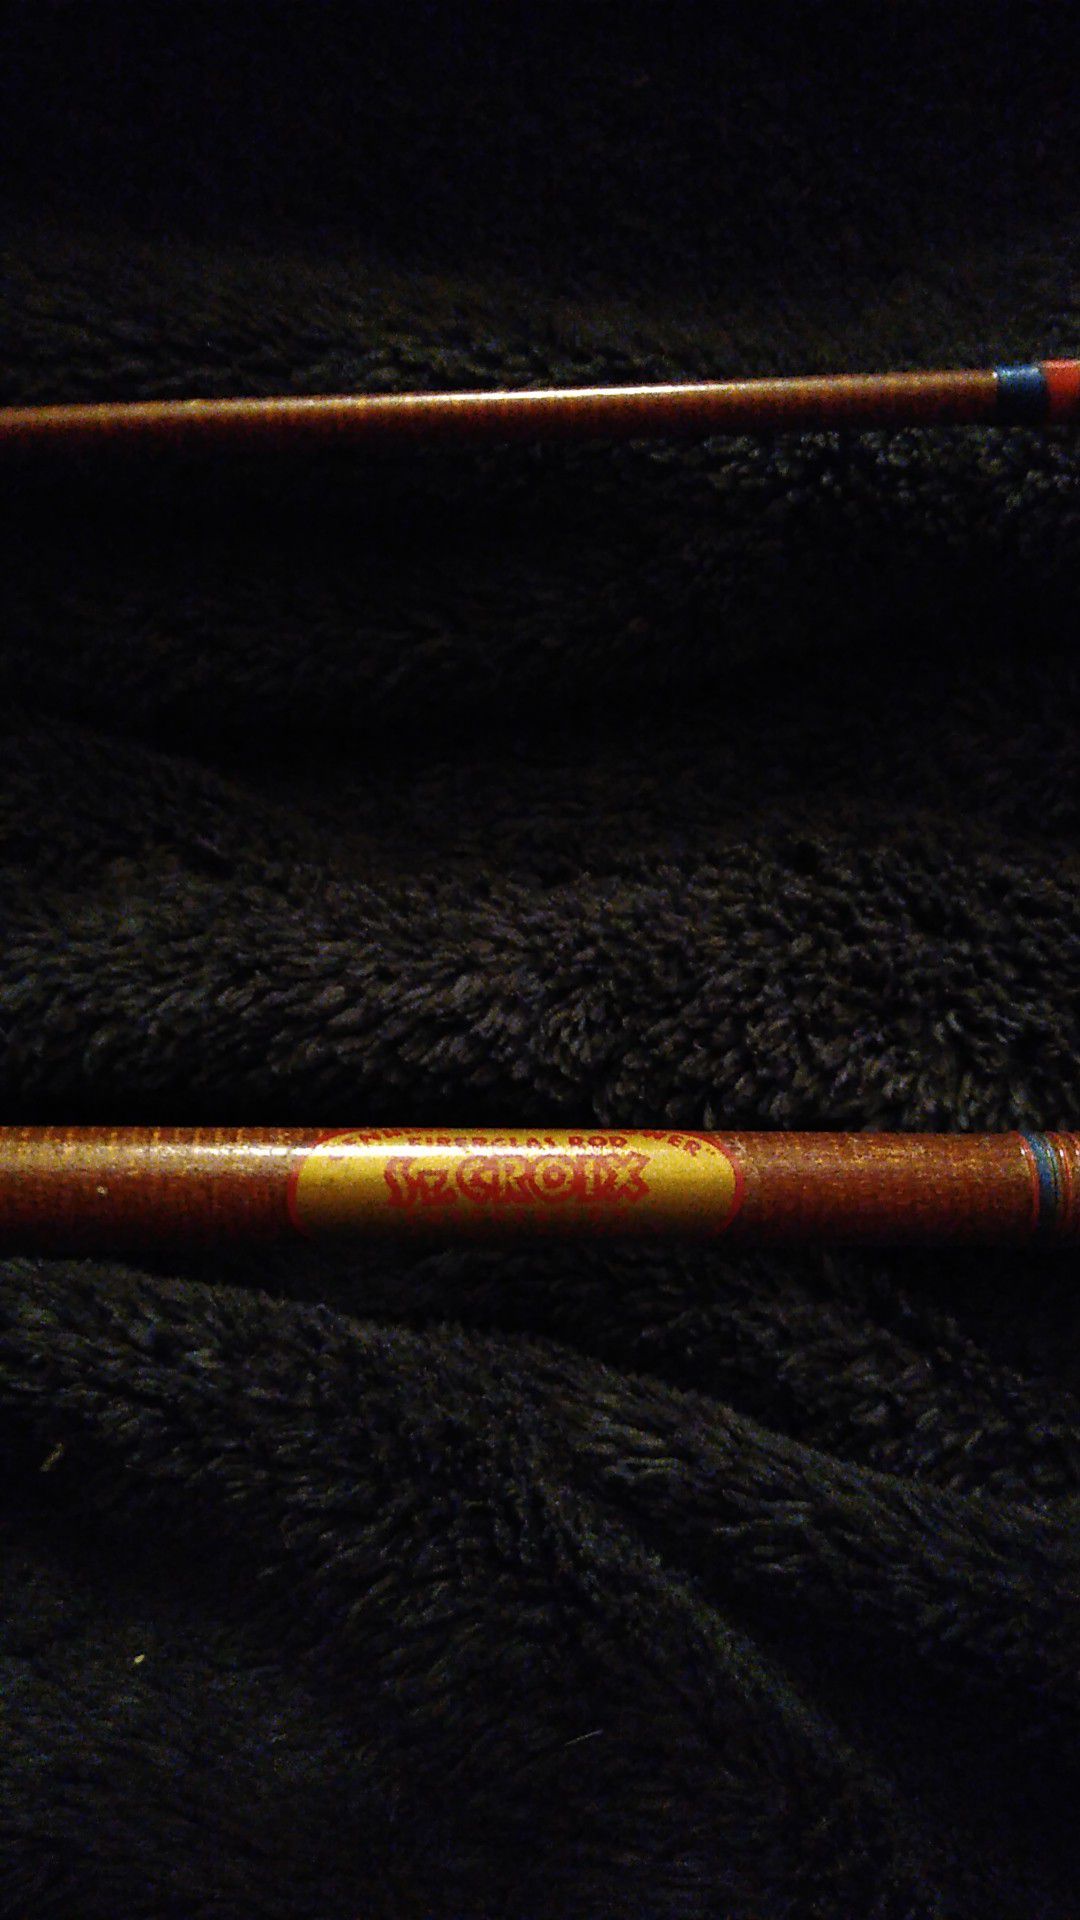 ST. Croix fly fishing rod it's a old one eyes are in great shape